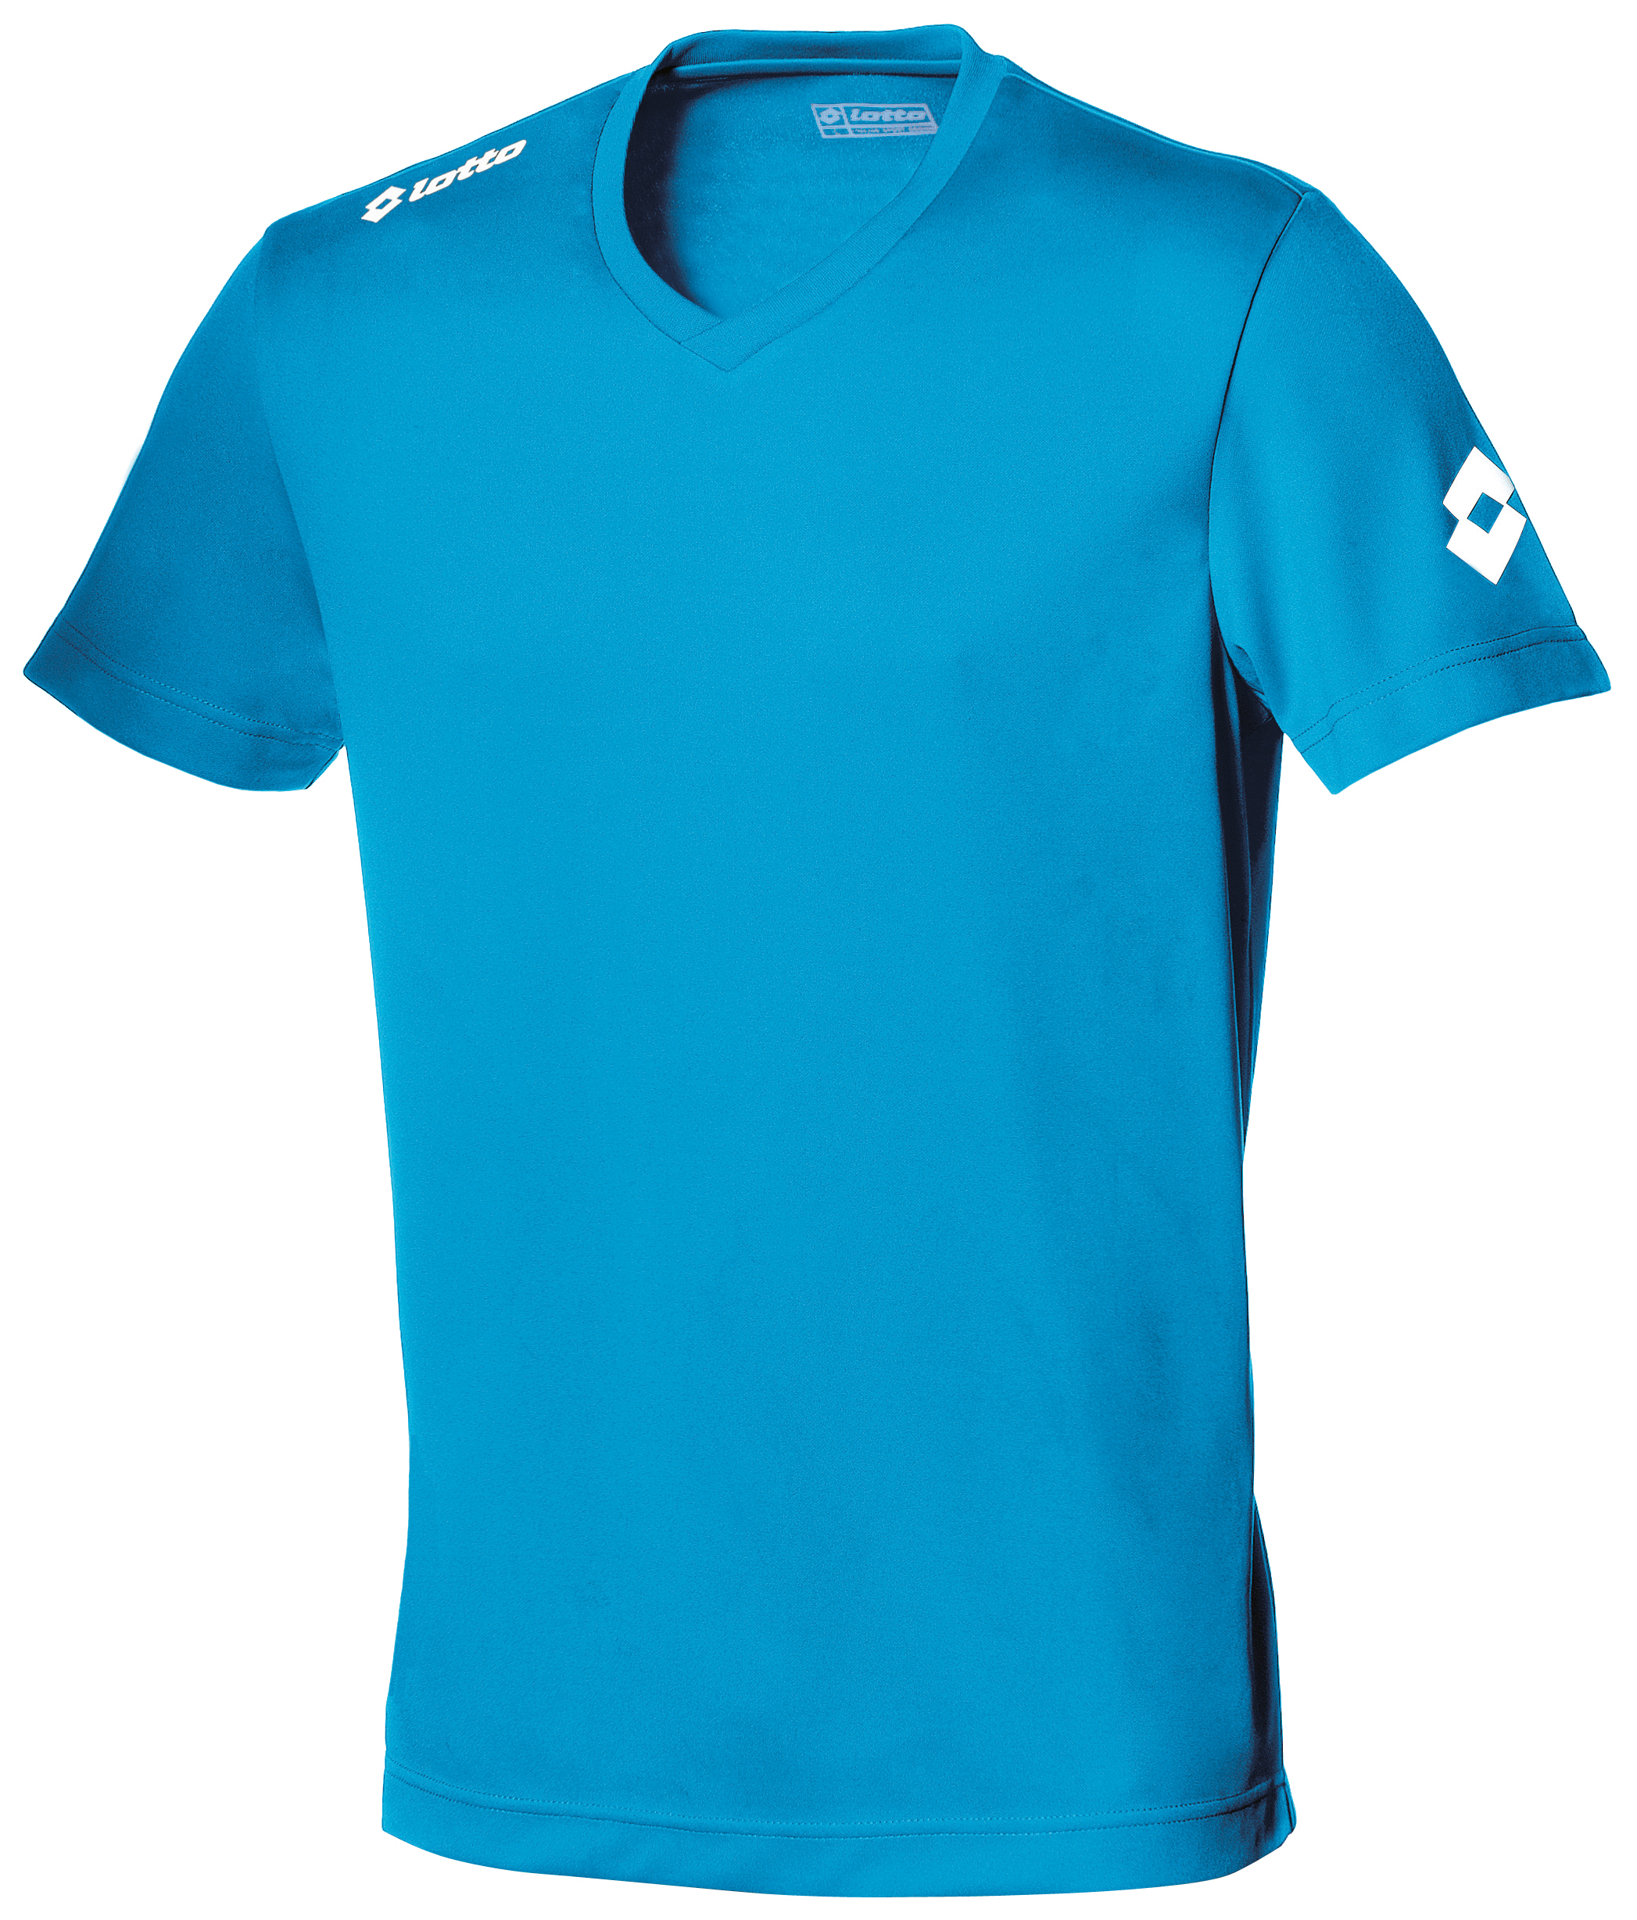 Short sleeve Jersey Team EVO in light blue with Taped V neck and 1 colour print logo on right shoulder and left arm sleeve